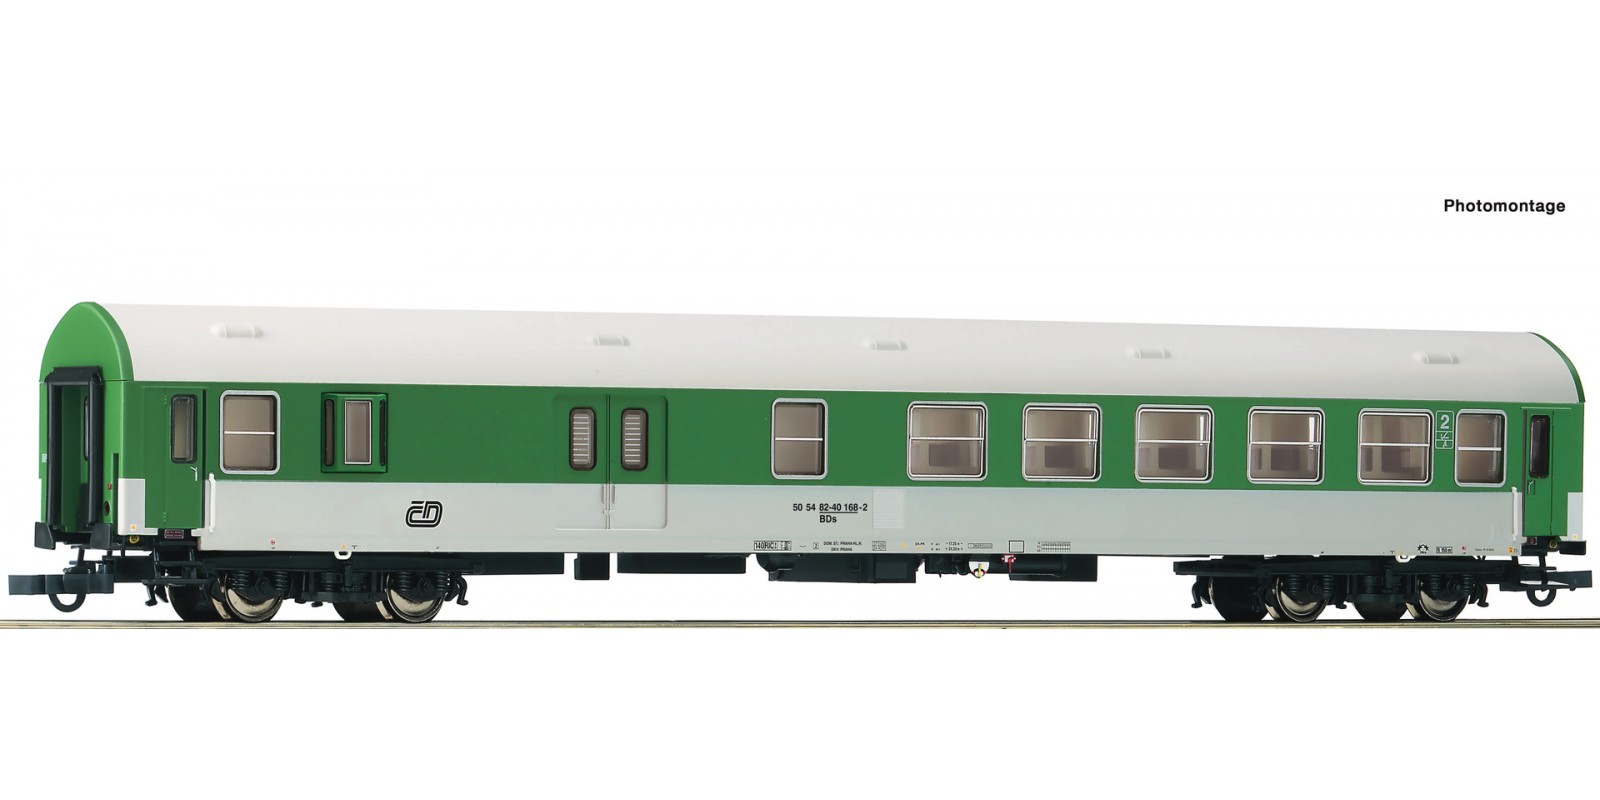 RO74786 2nd class coach with luggage compartment, CD